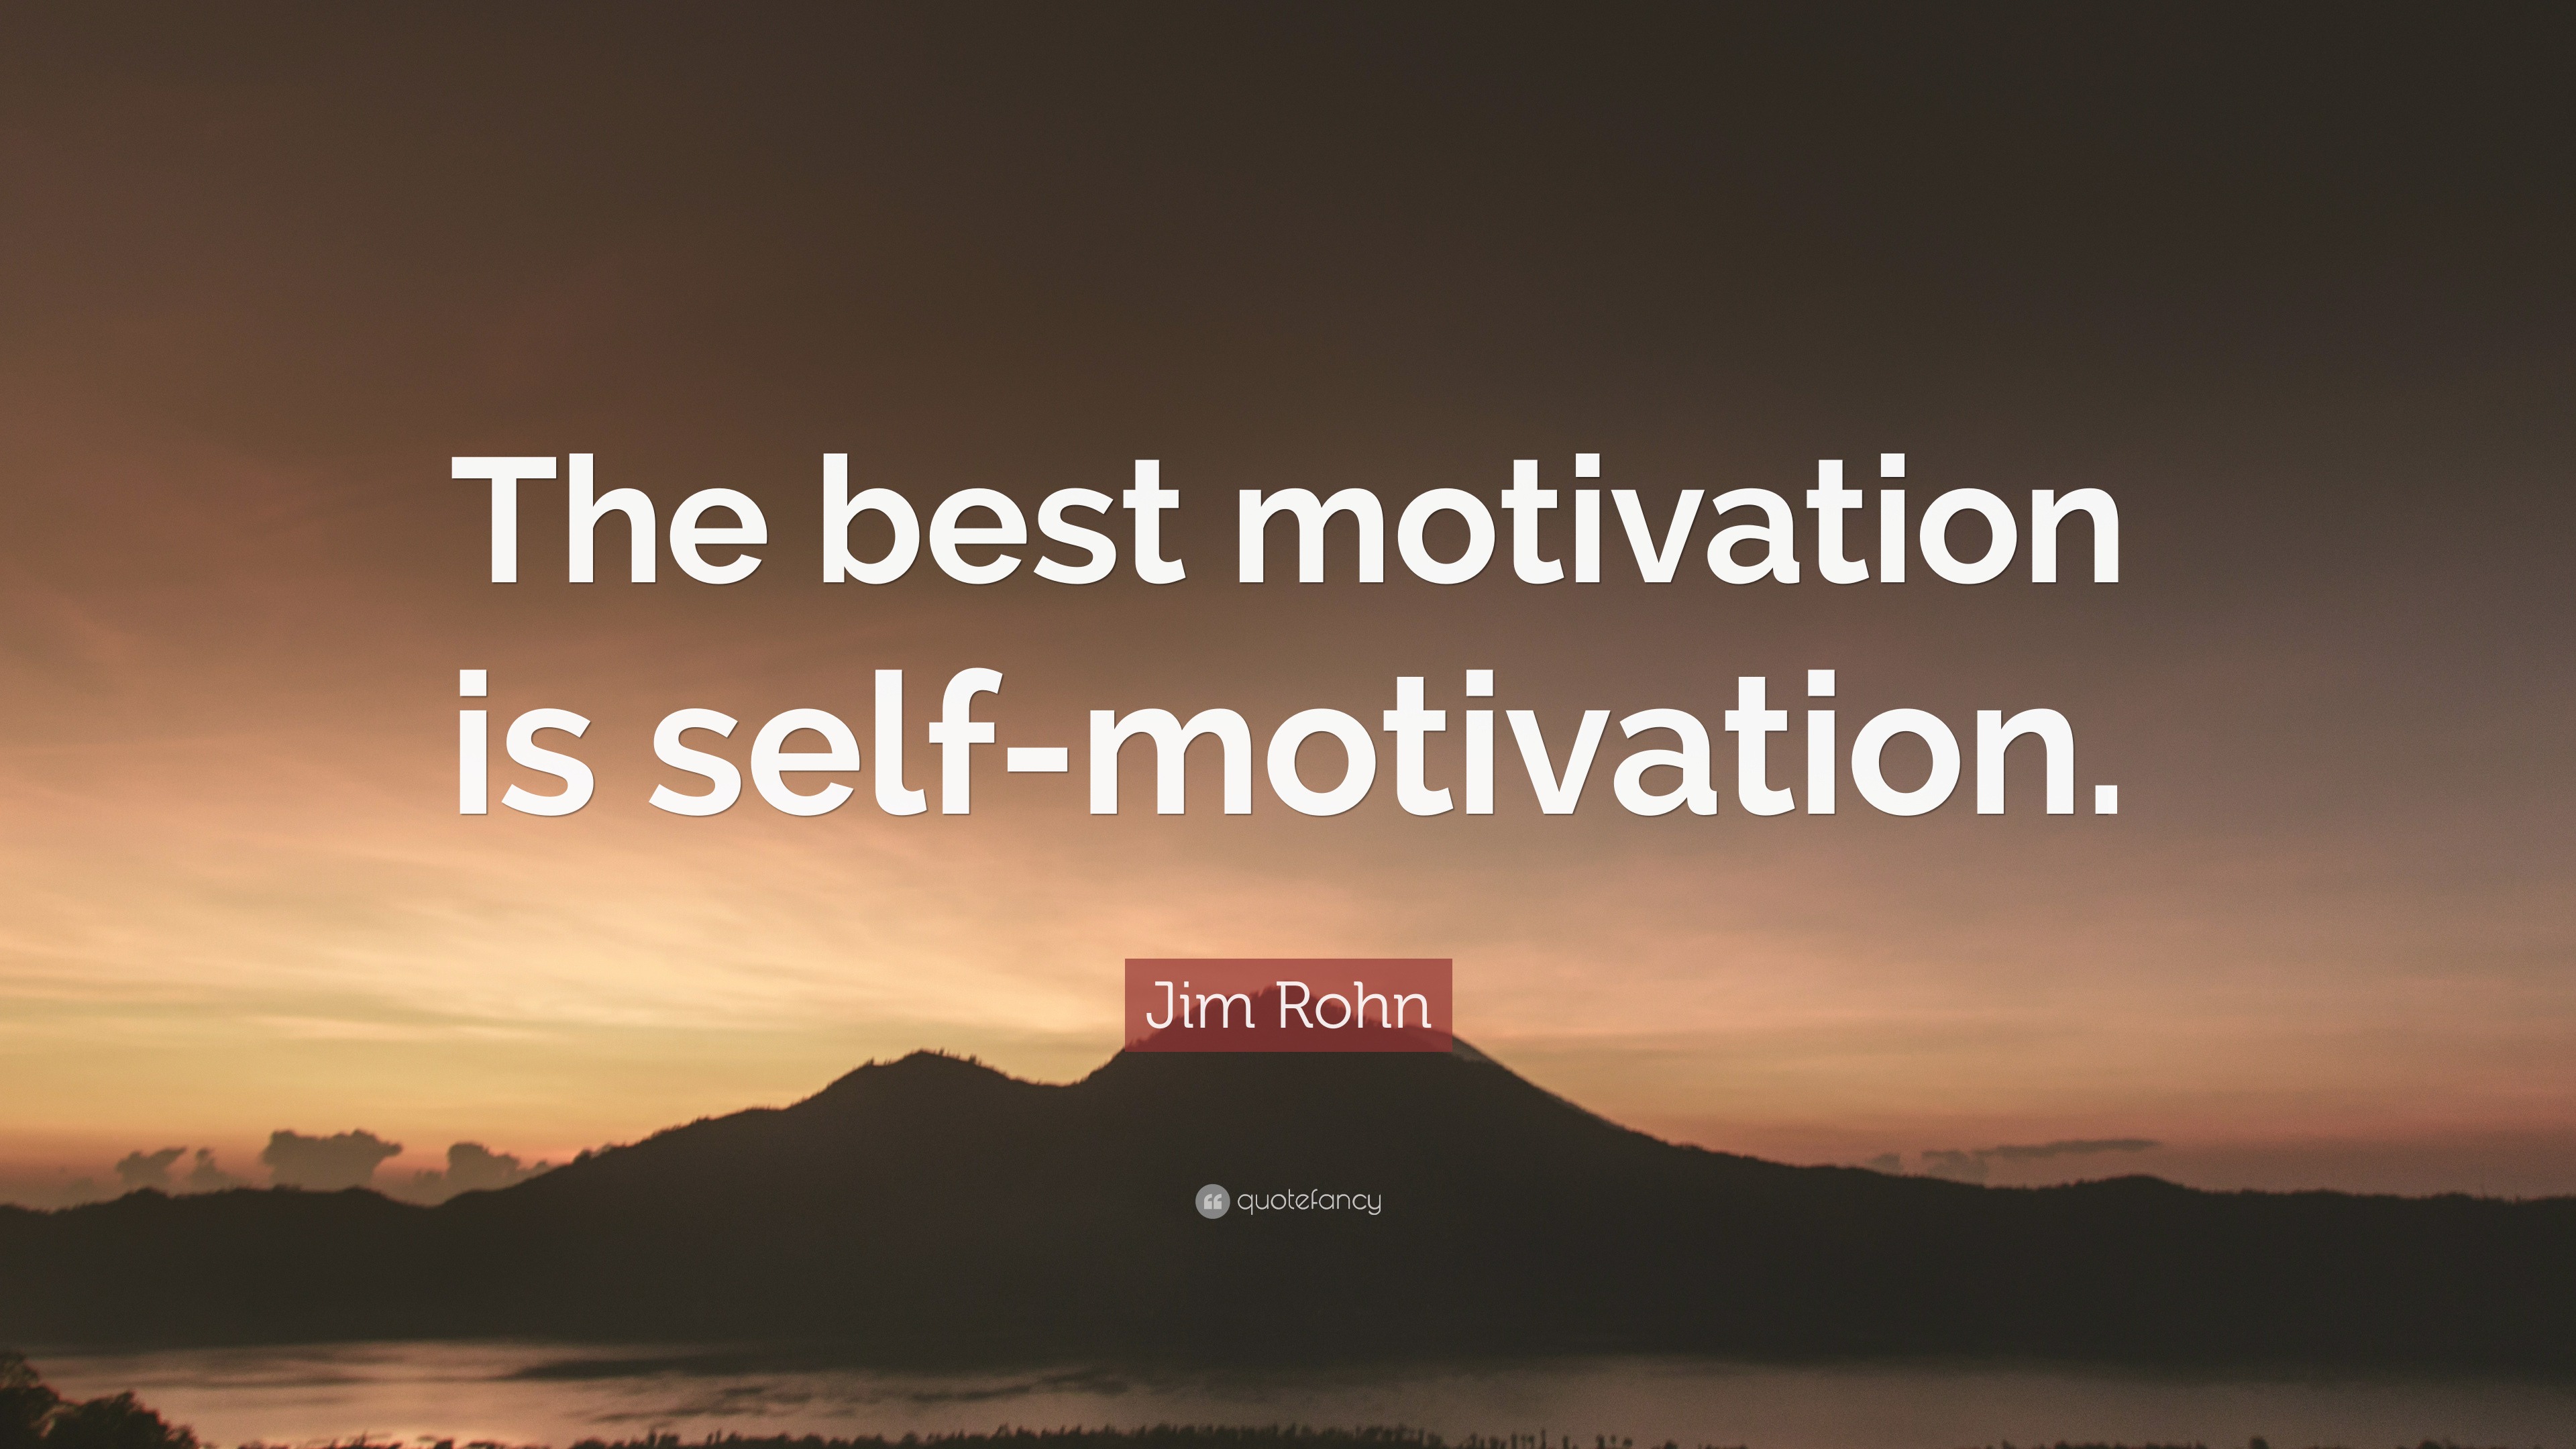 Jim Rohn Quote: “The best motivation is self-motivation.”